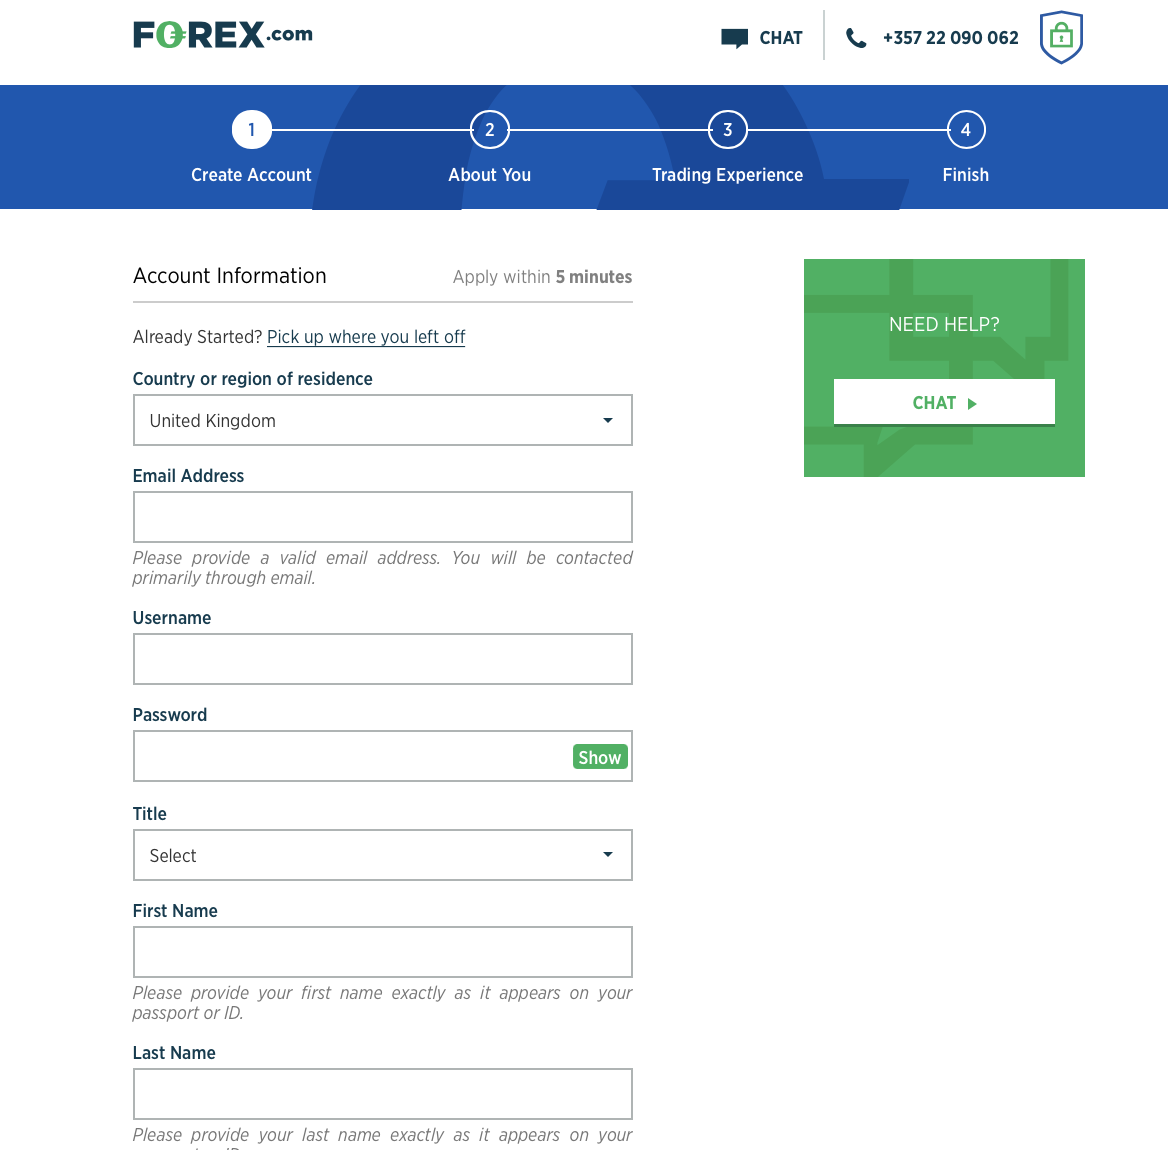 The Forex.com sign up form